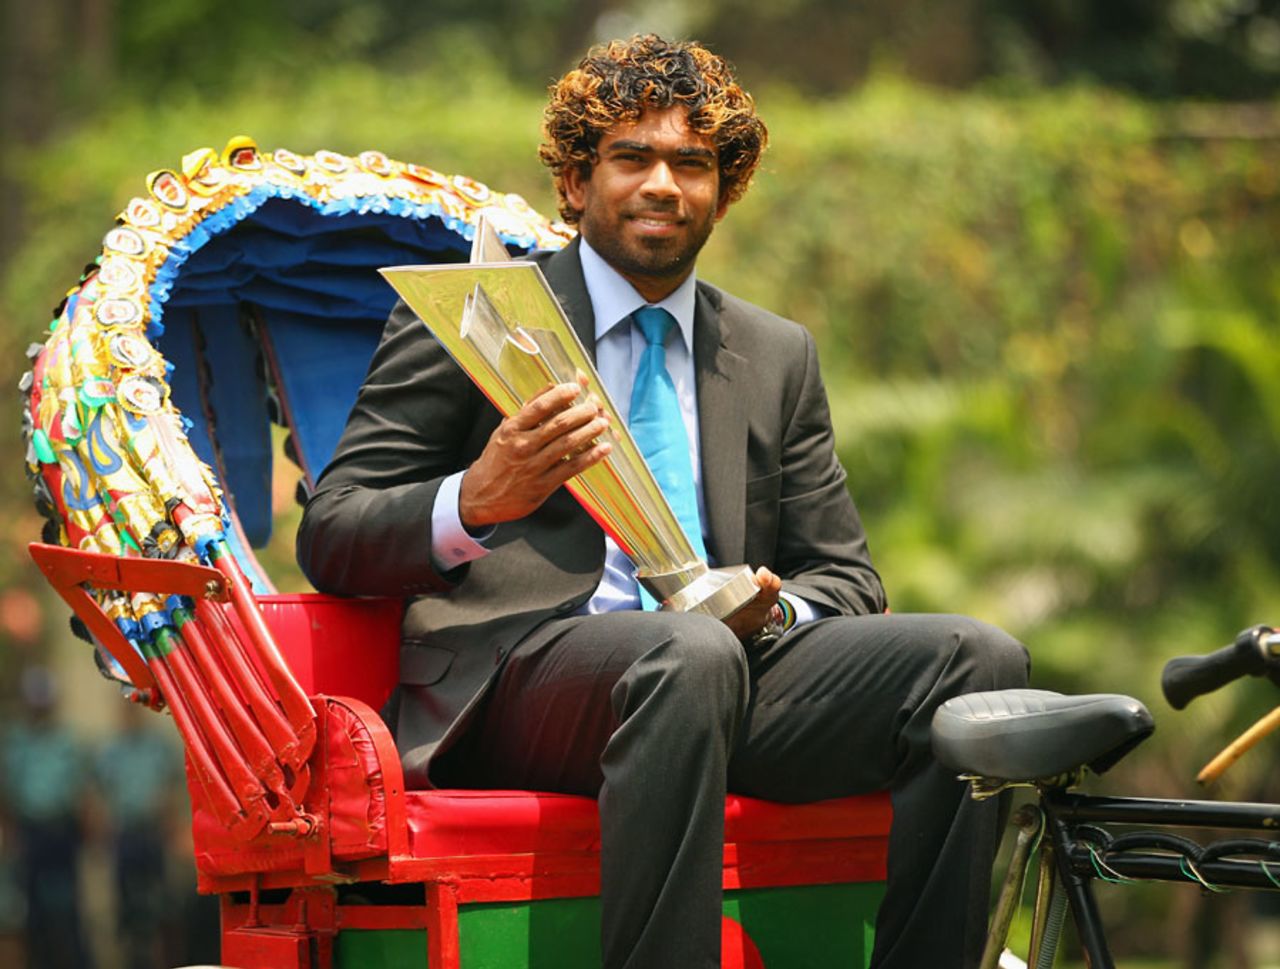 Lasith Malinga is perched atop a cycle rickshaw with the World T20 trophy, Dhaka, April 7, 2014